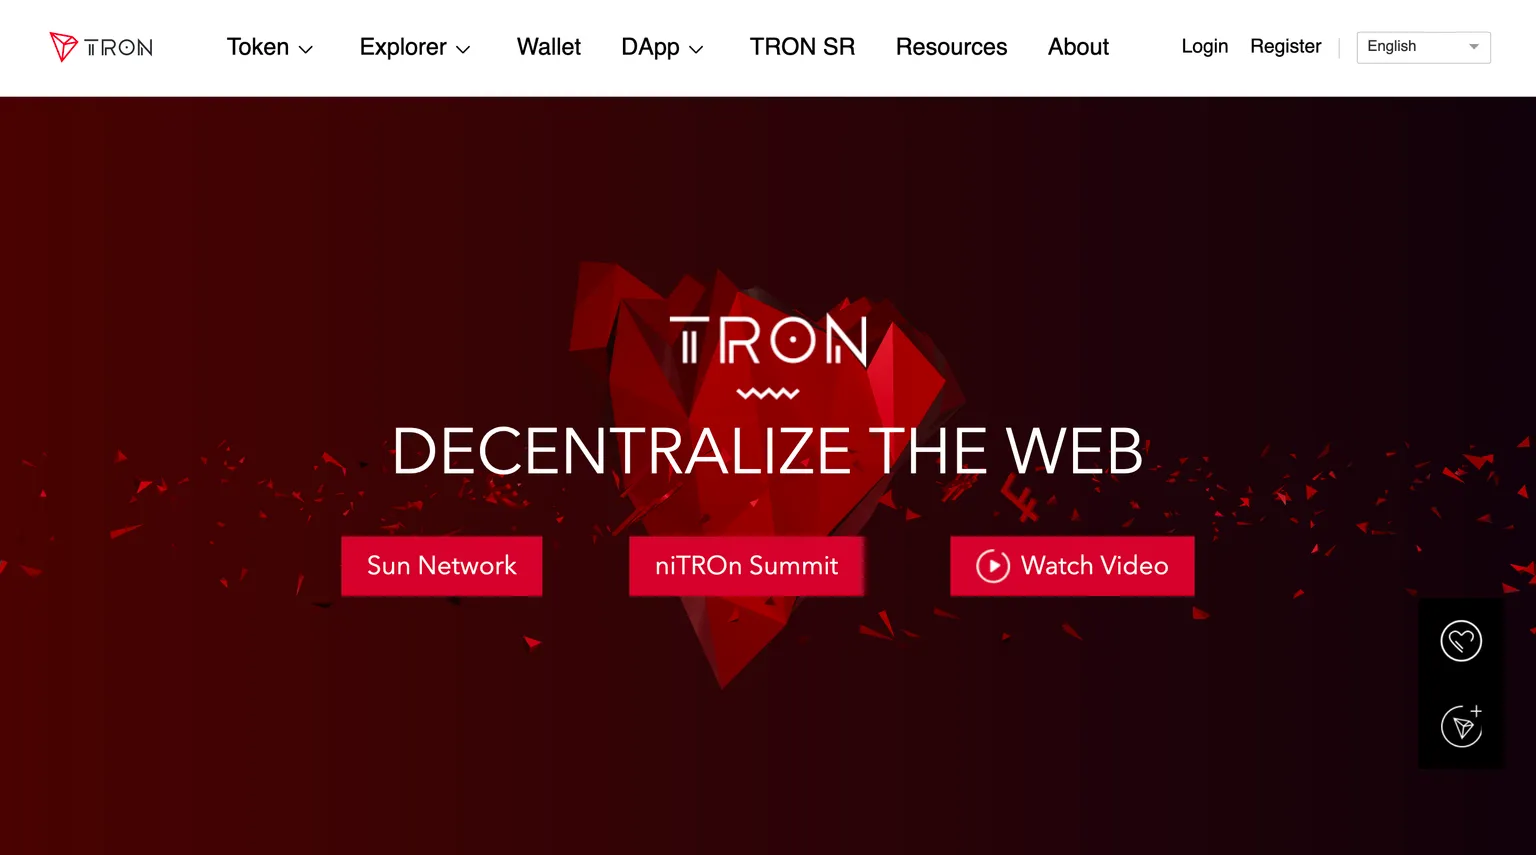 snapshot of the tron website showing uppercase text in the logo